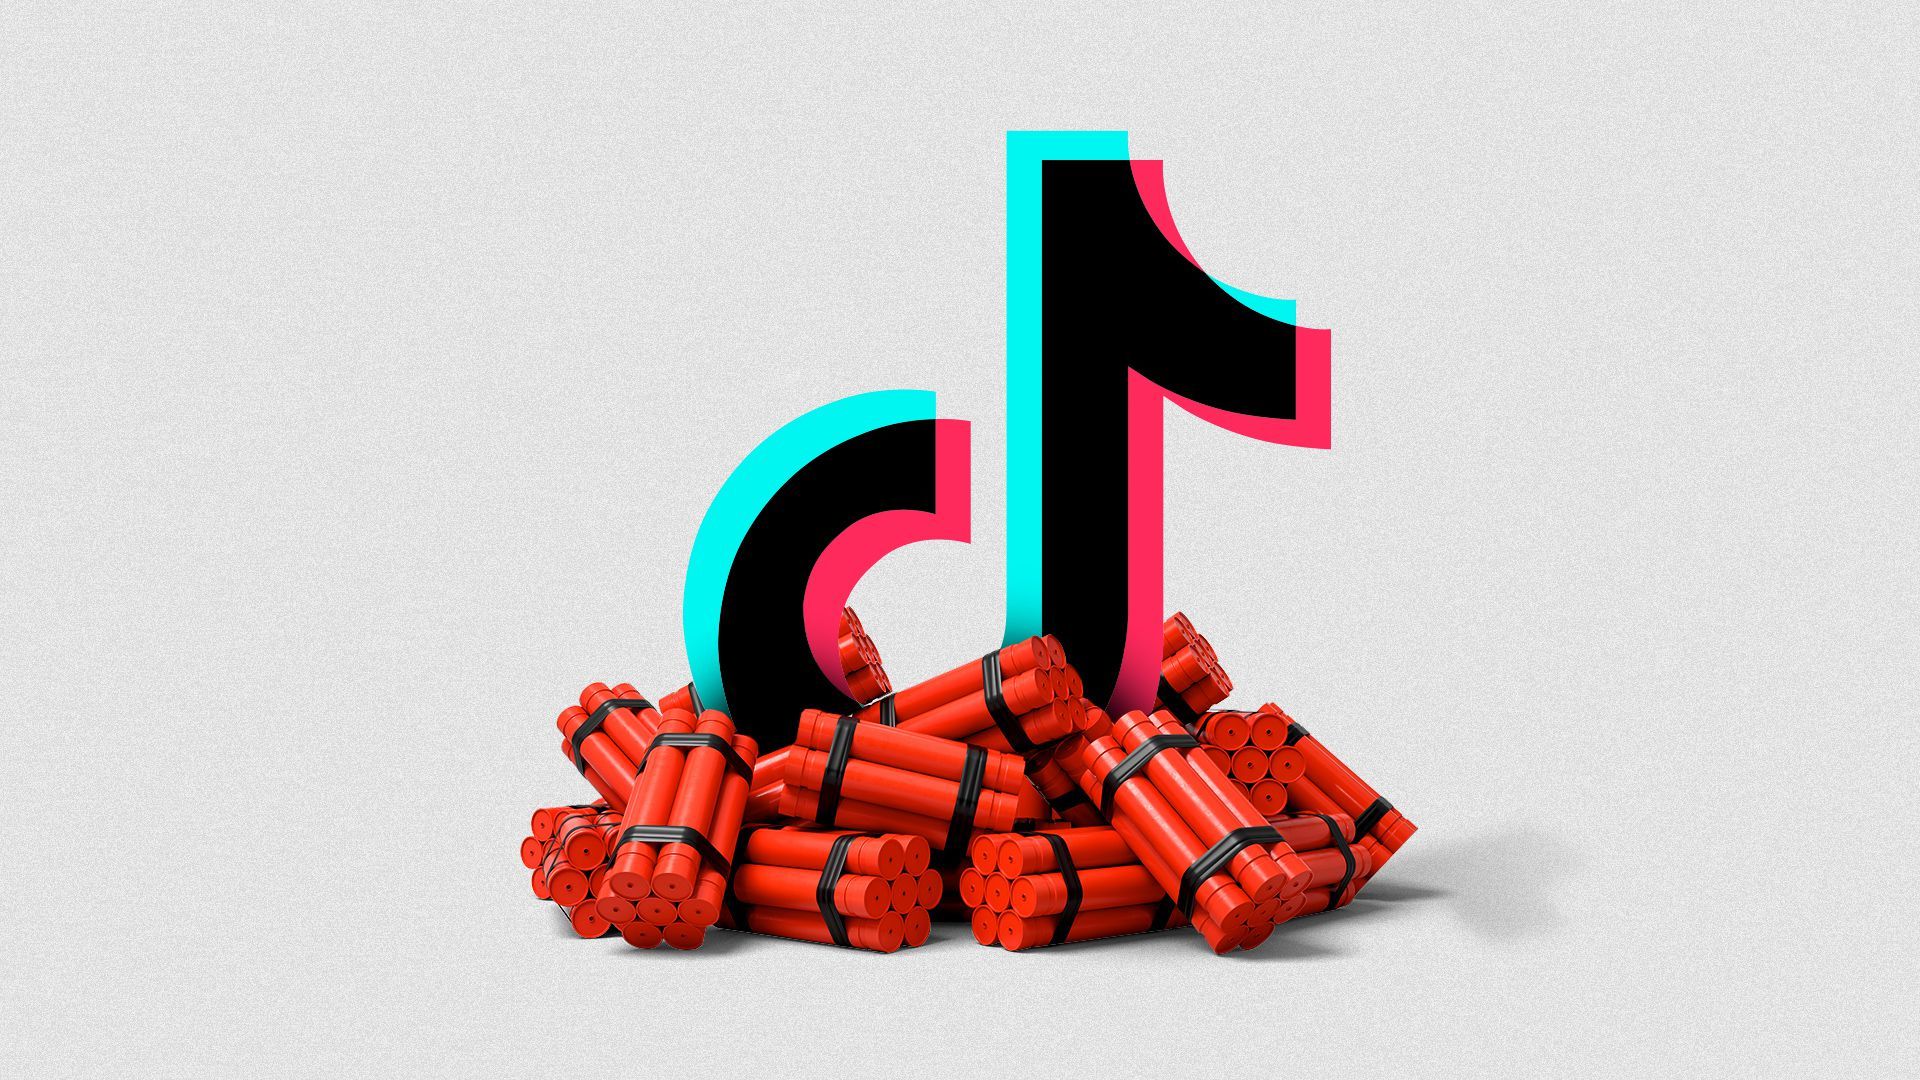 Illustration of the Tik Tok logo in the center of a pile of dynamite. 